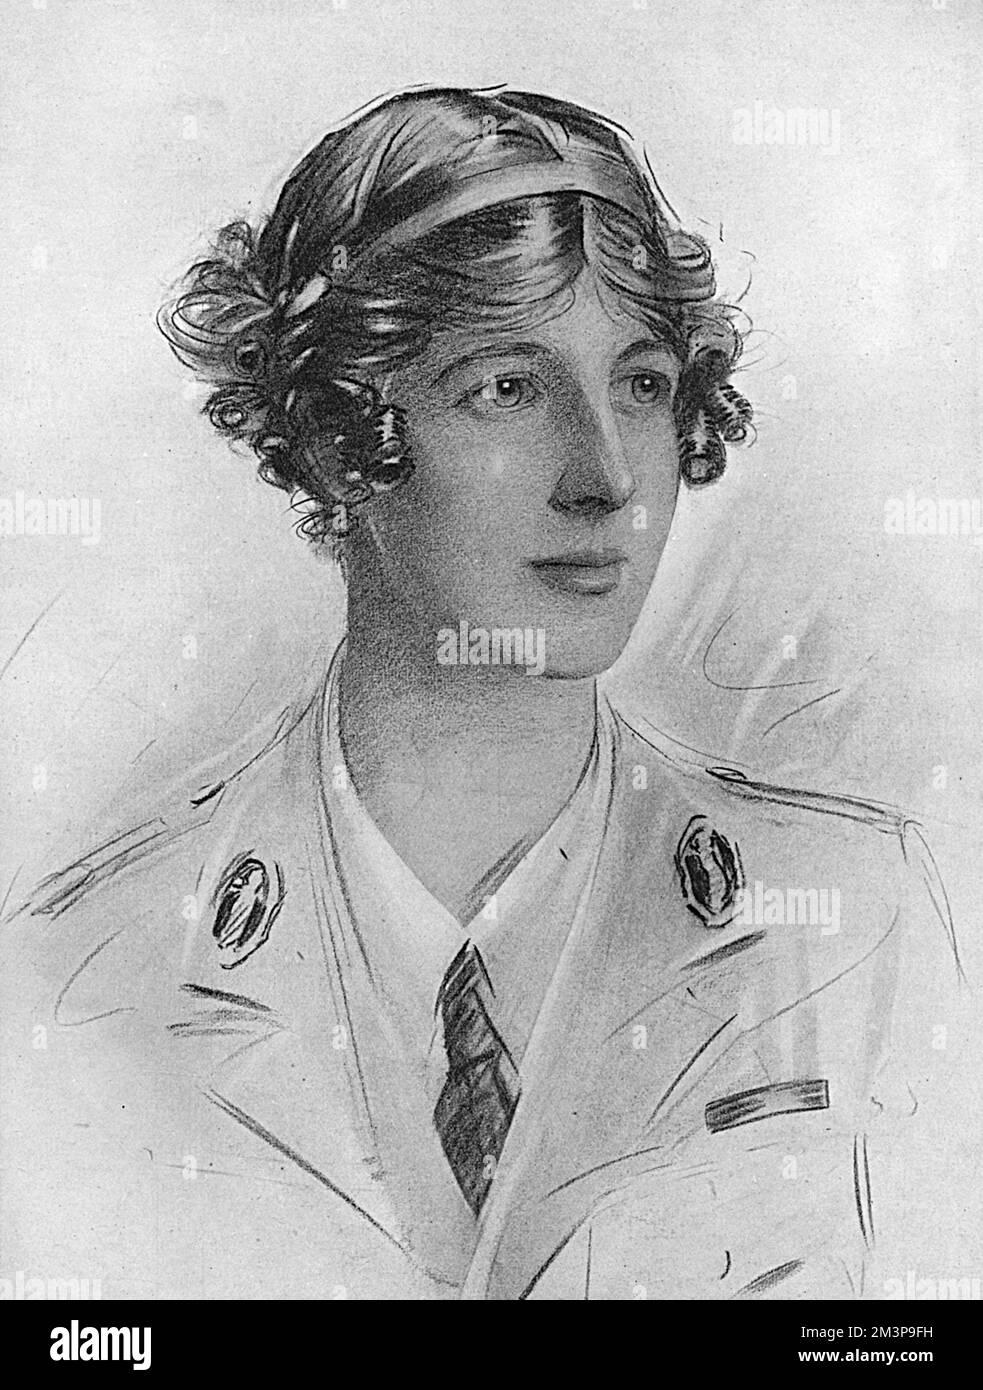 Lady Londonderry, formerly the Hon. Edith Chaplin, pictured in 1918 when she was President of the Women's War Services Legion (previously known as the Women's Legion) which provided military cooks and motor drivers for the War Office.  She was awarded the Order of the Dame of the British Empire for her work during the war.       Date: 1918 Stock Photo